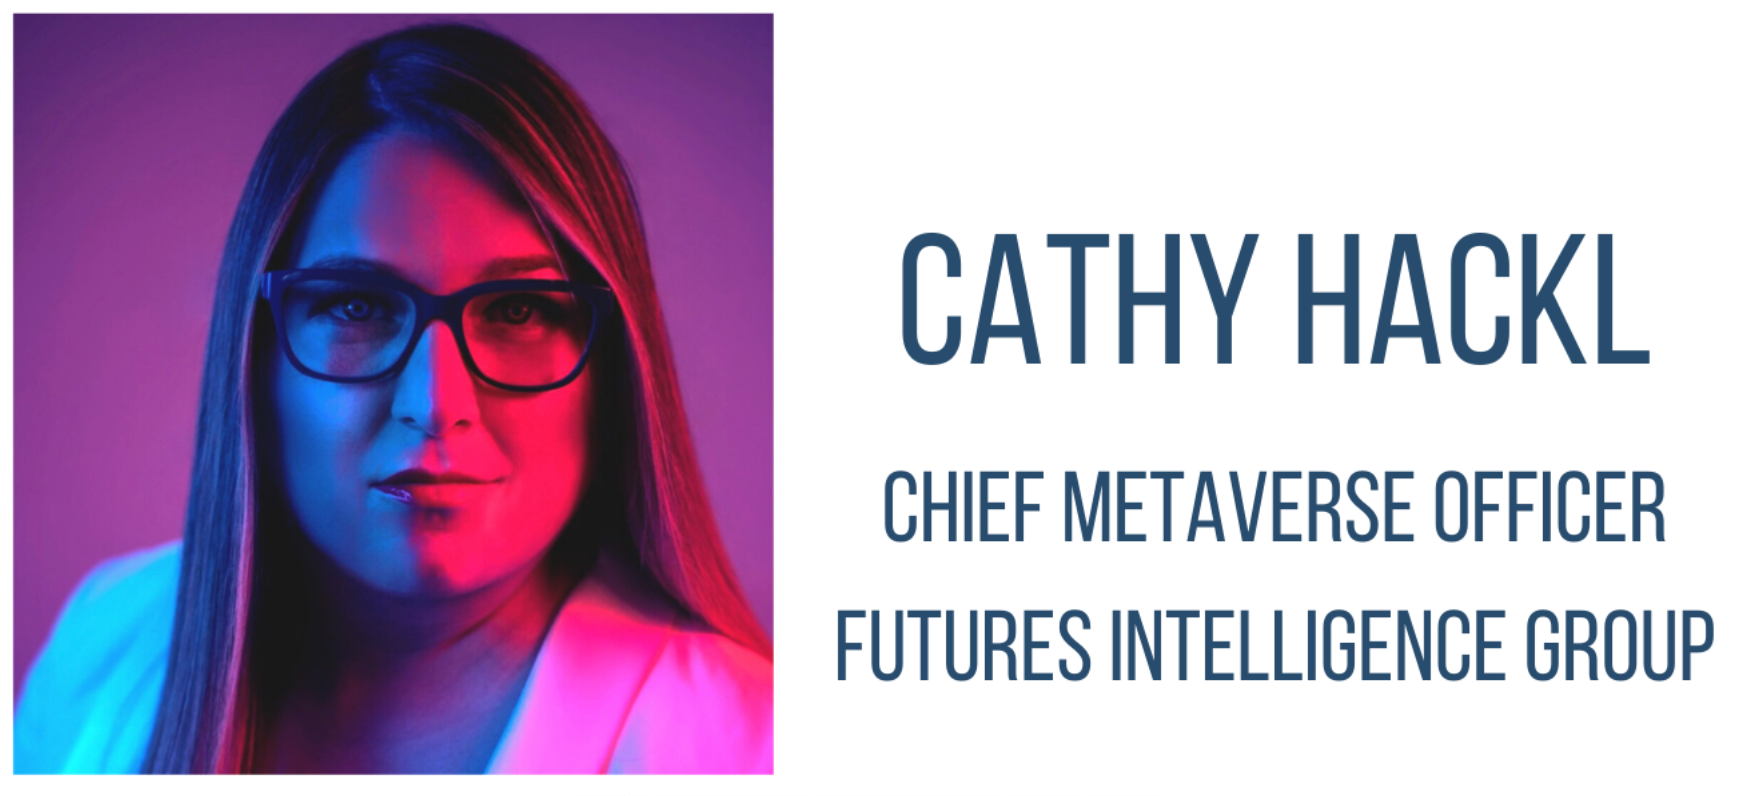 Cathy Hackl, Chief Metaverse Officer, Futures Intelligence Group